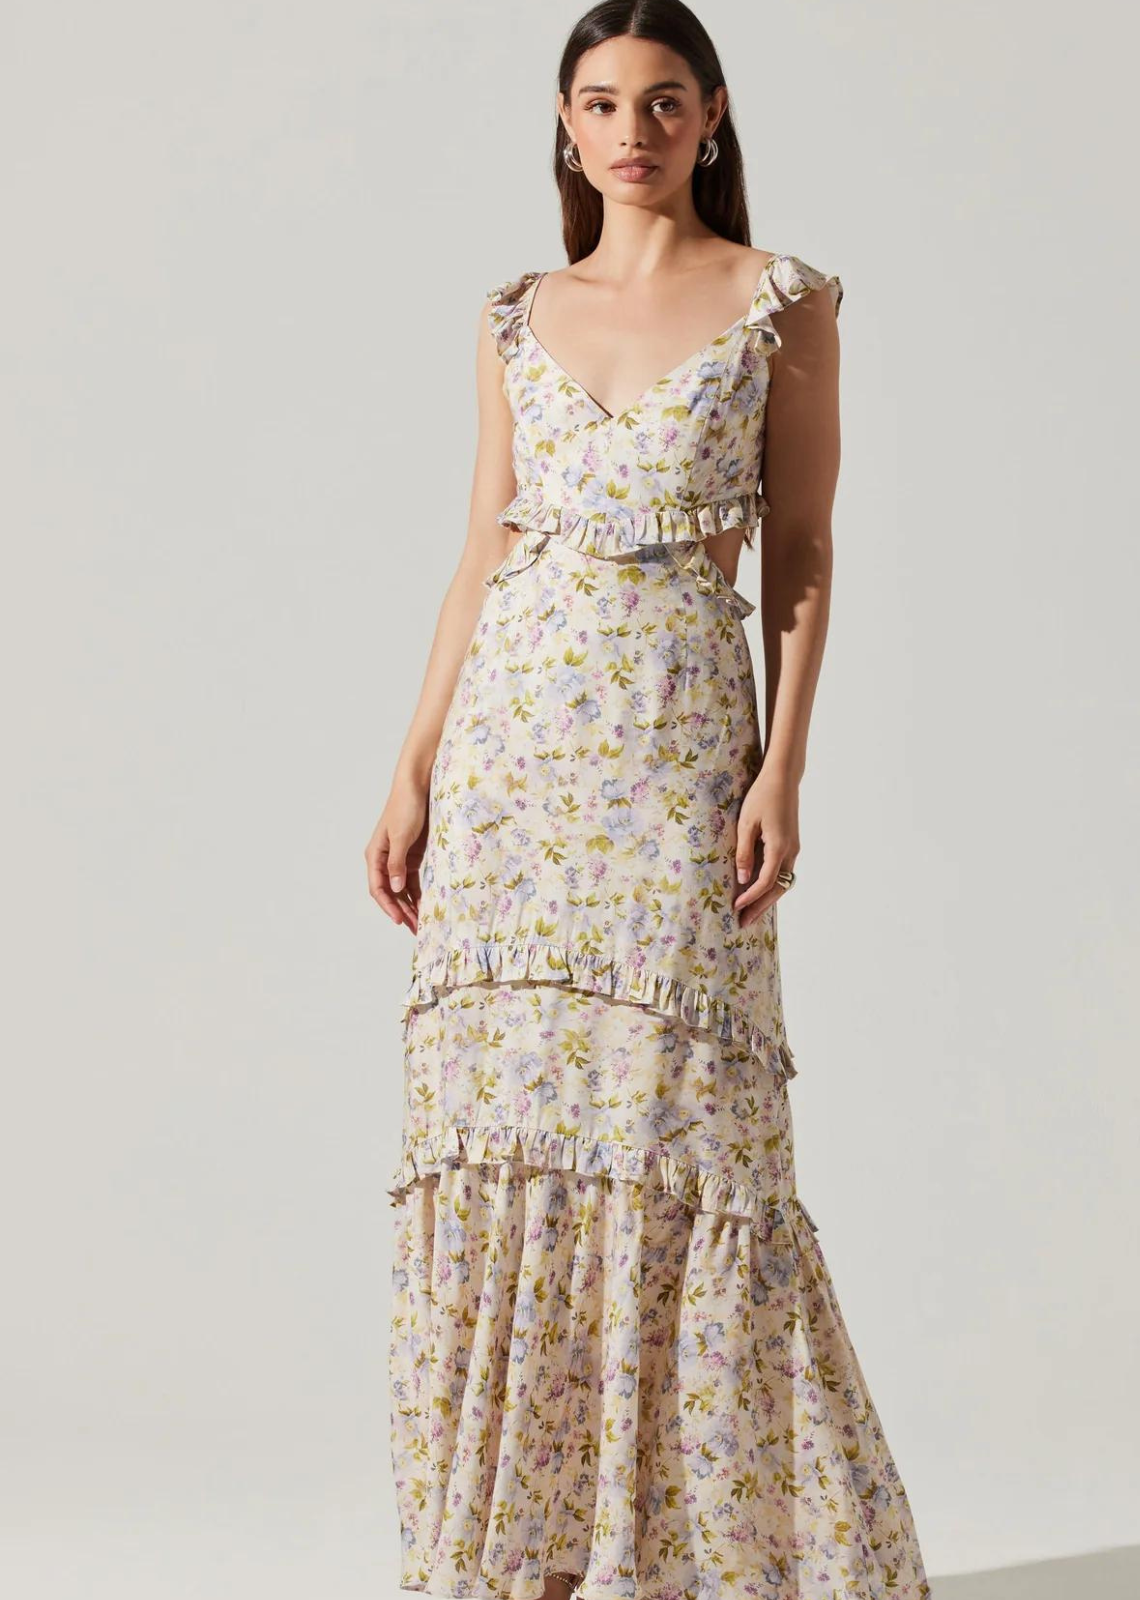 ASTR The Label Cassie Floral Ruffle Maxi Dress. Plunging neckline, ruffle sleeves Cutouts at side, tie back closure, adjustable straps Slight boning at bodice, fully lined, concealed back zipper closure